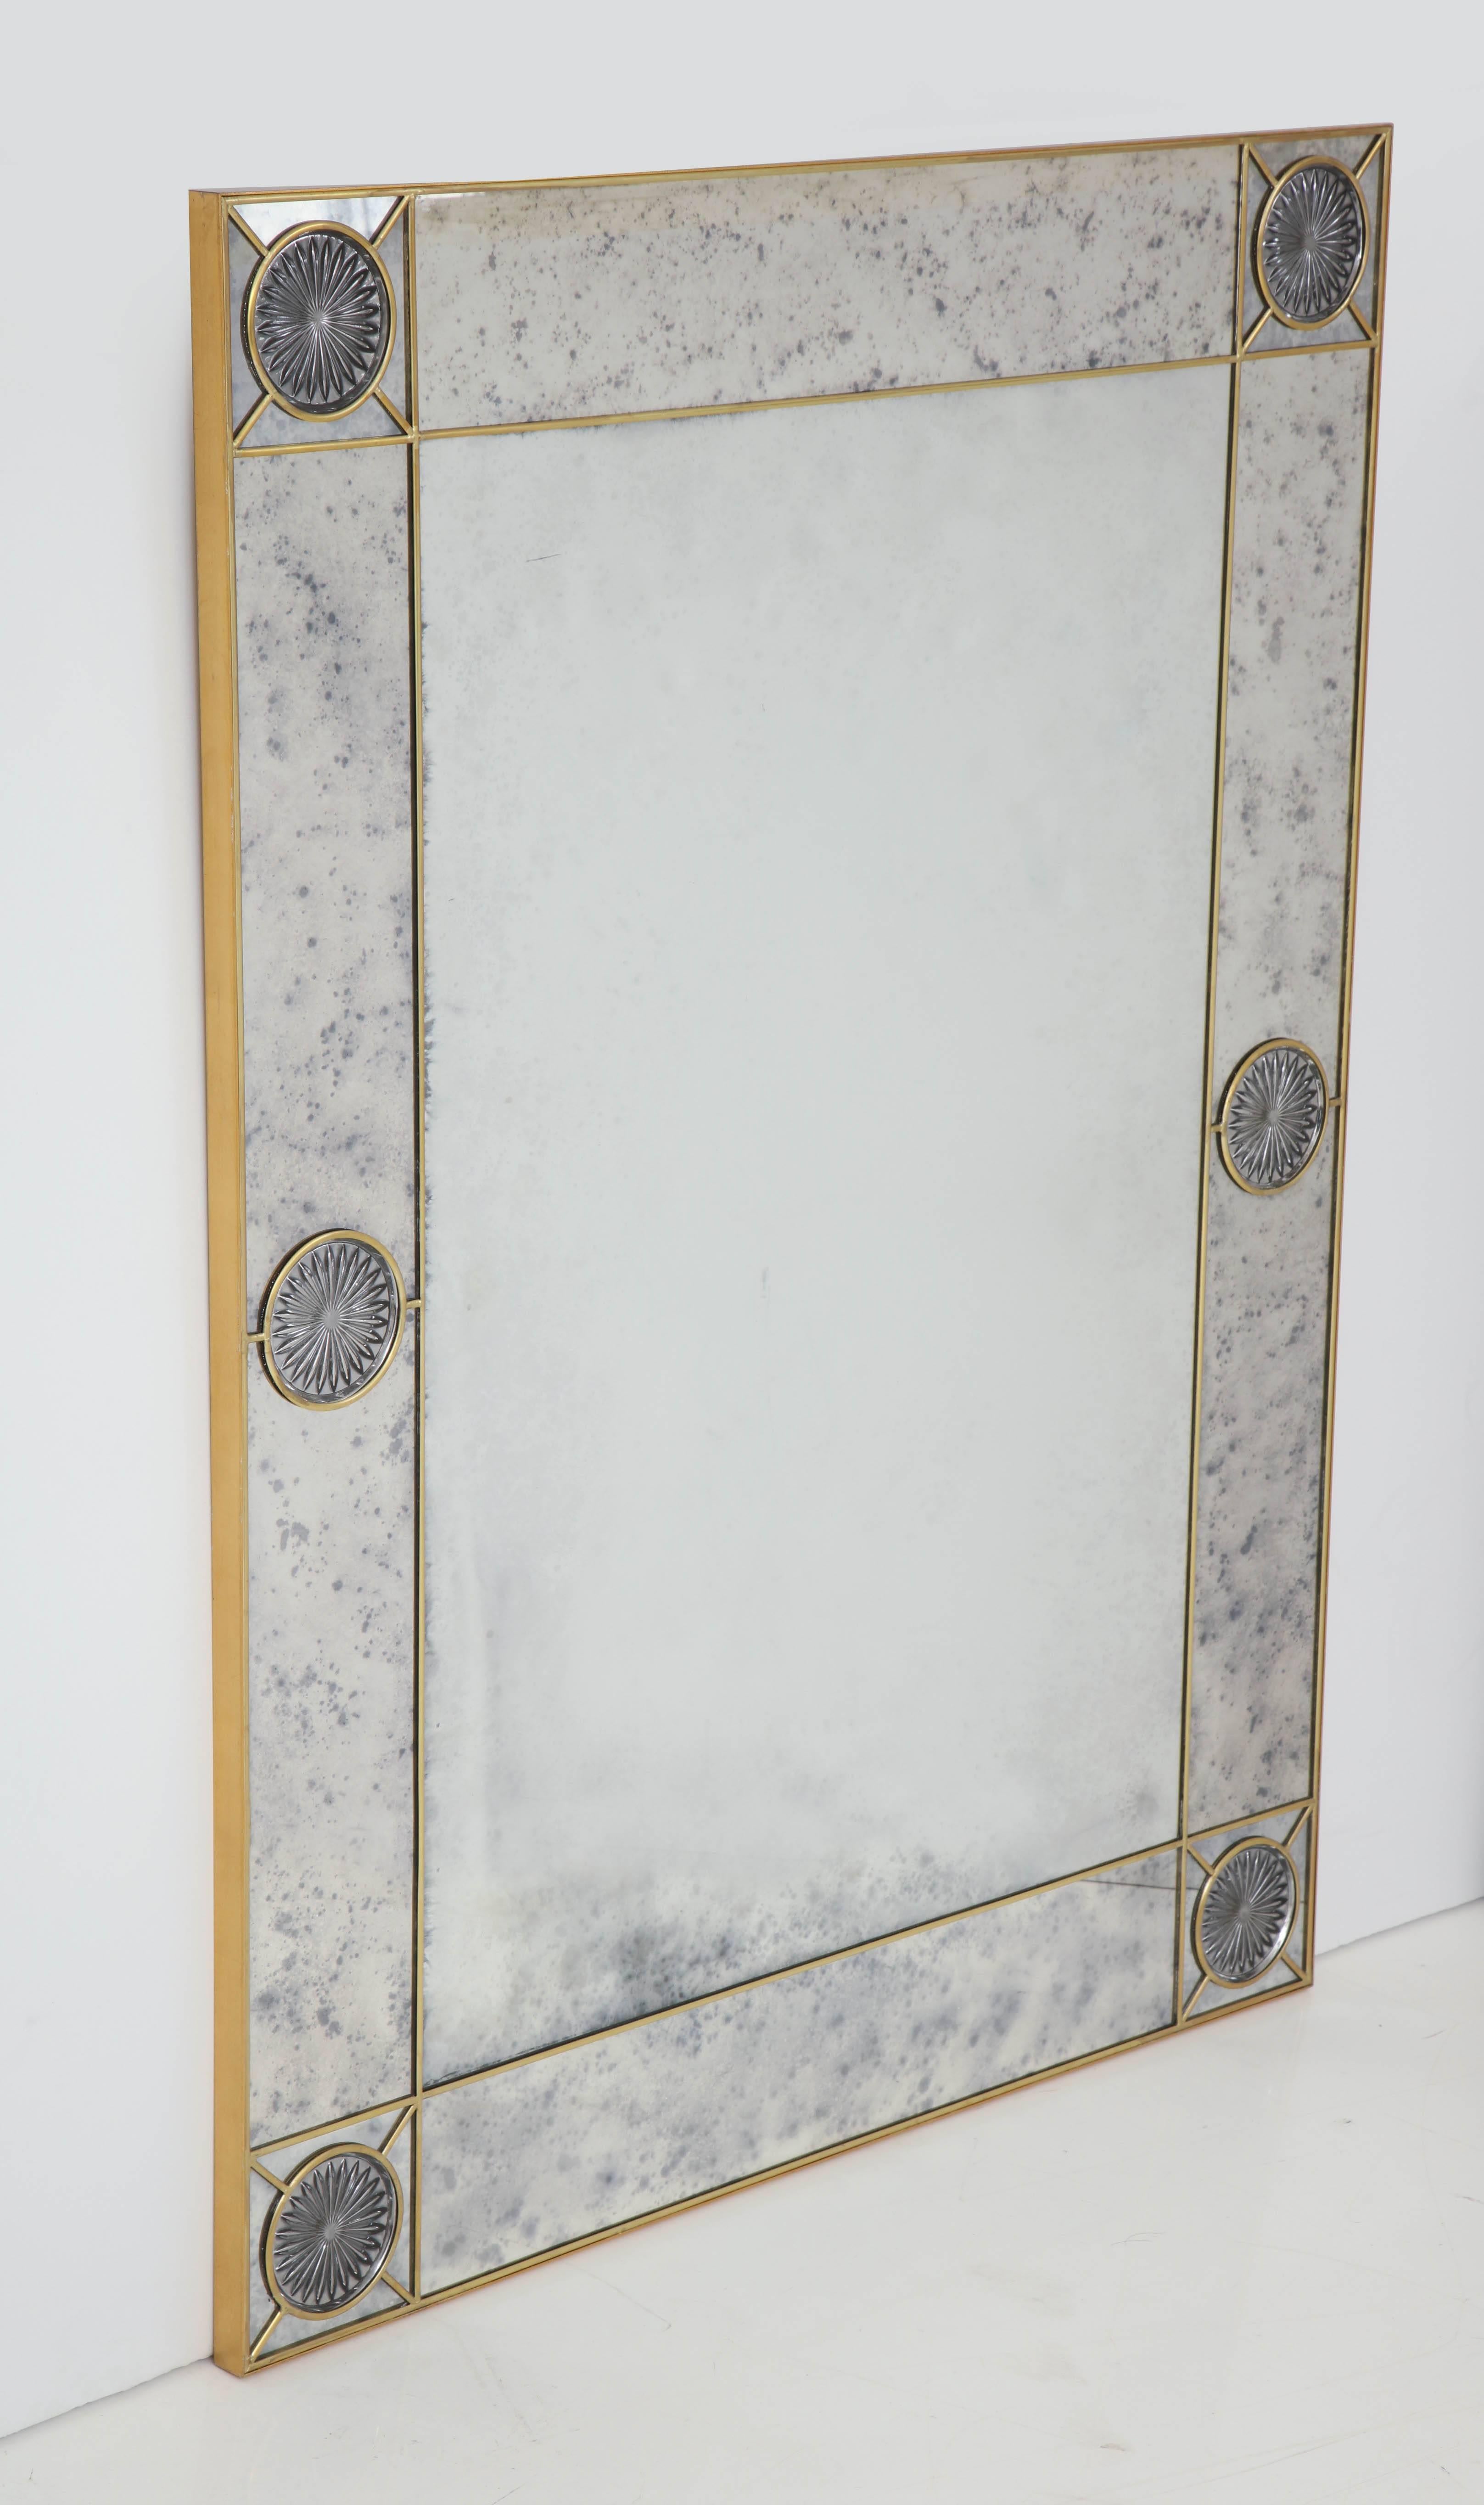 Decorative handcrafted brass and stained glass mirror by New York artist.